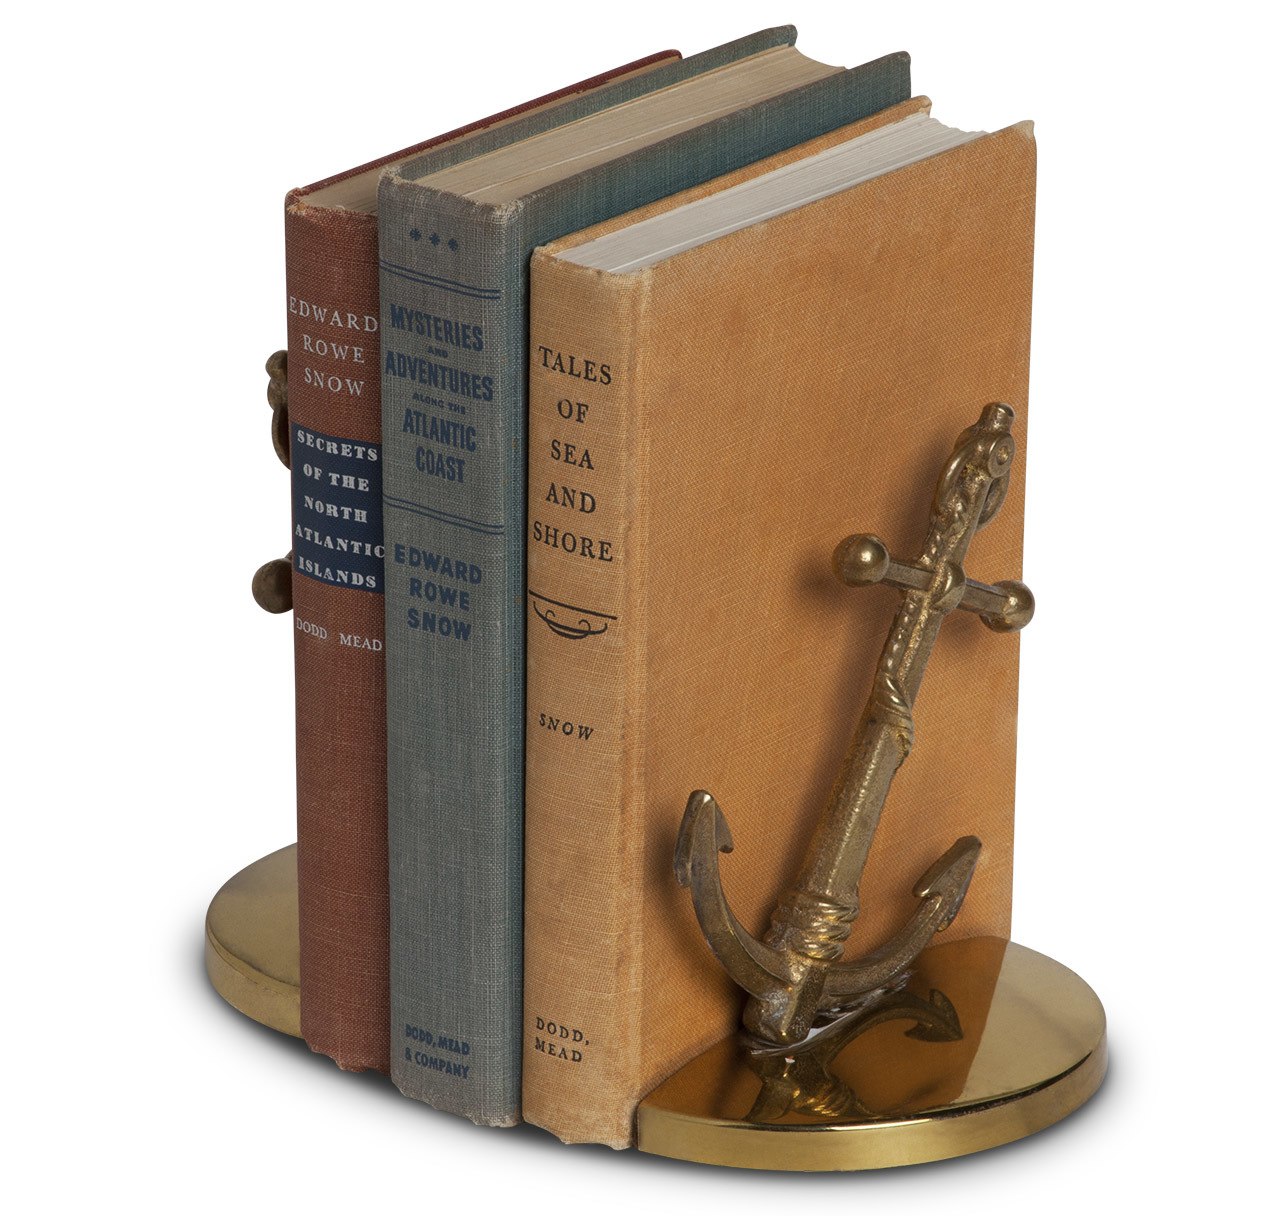 Vintage Nautical Brass Anchor Bookends